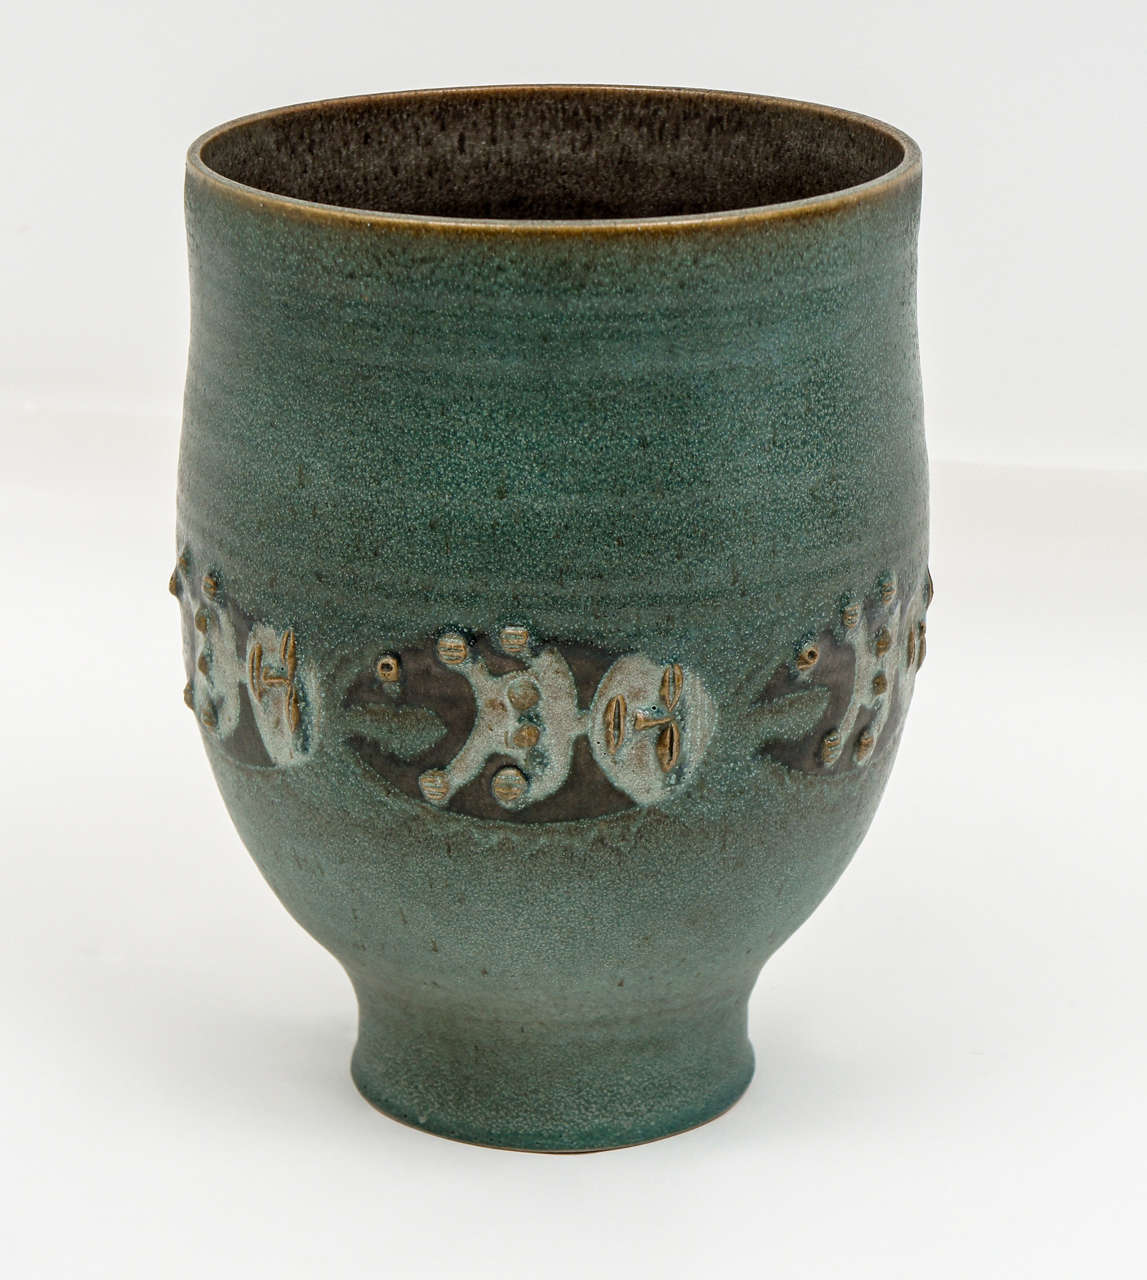 Dramatic piece by Edwin and Mary Scheier, important studio potters of the 20th C.This highly stylized creation is in a soft. muted green adorned with raised figures around the central portion.
This piece is signed and special!